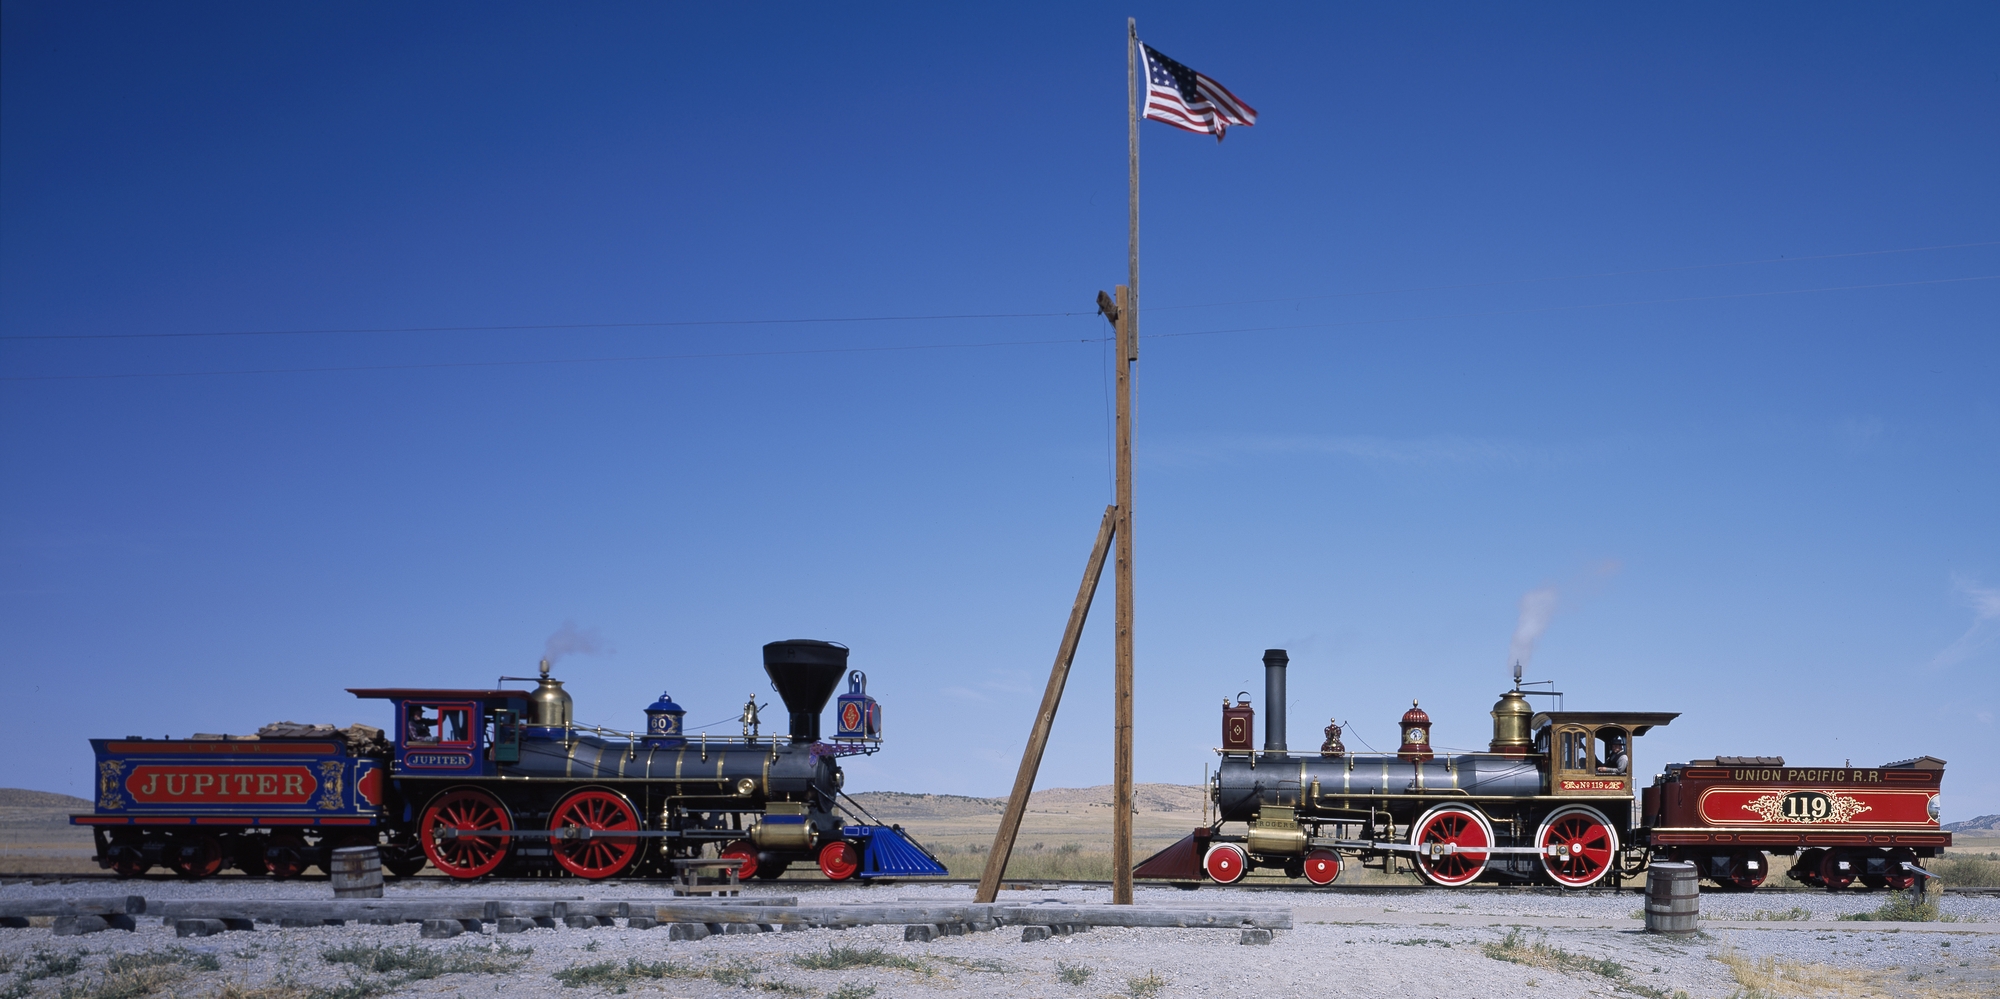 Meeting of replicas of Union Pacific No. 119 and Central Pacific “Jupiter” at the Golden Spike National Historic Site in Utah where the gap in the First Transcontinental Railroad was closed in 1869.